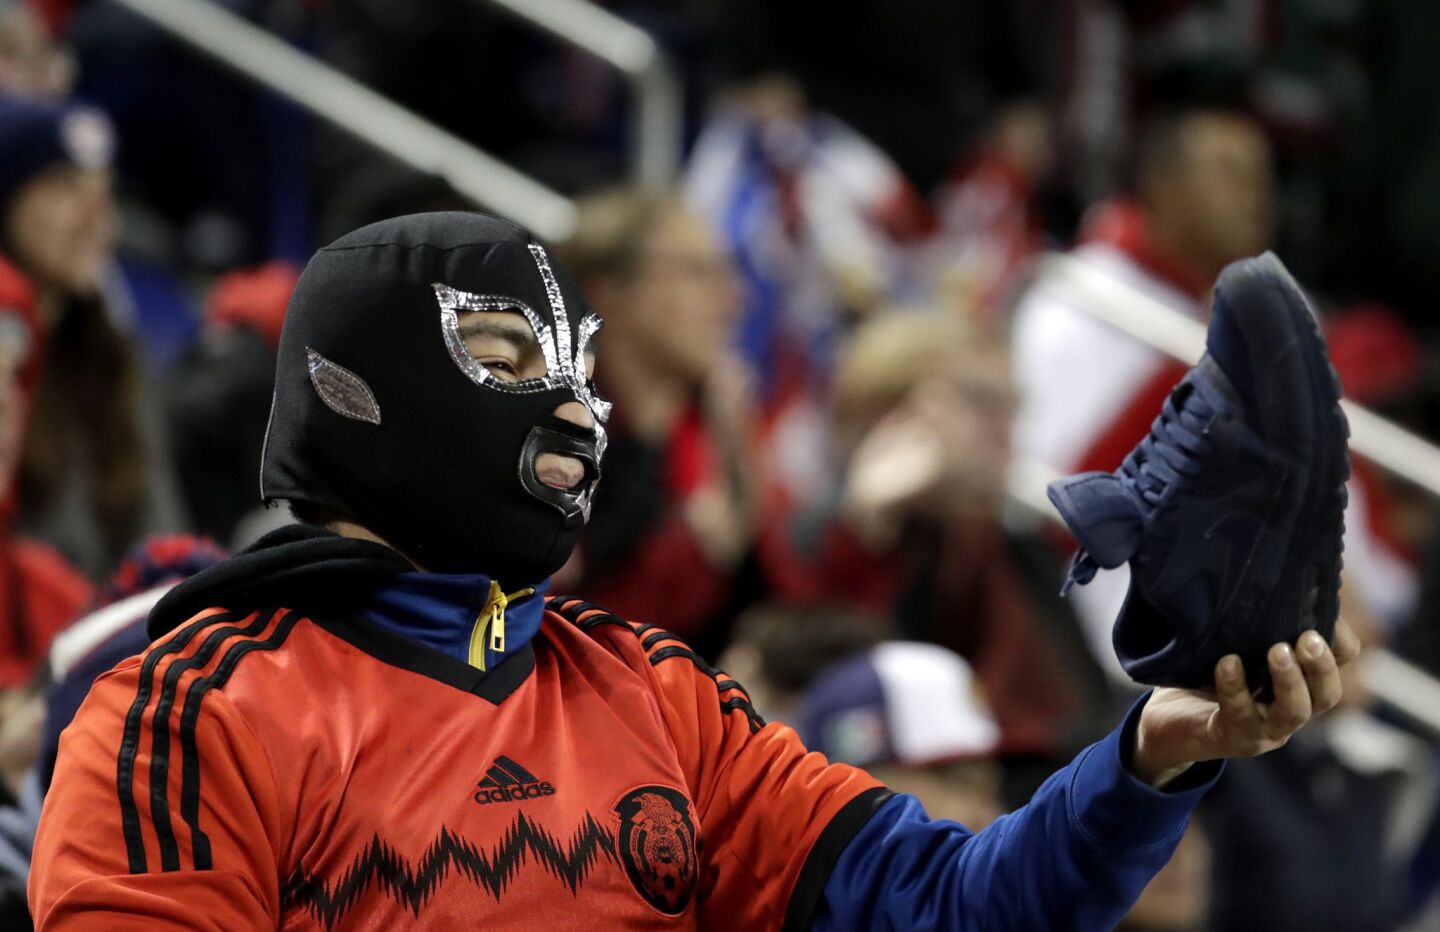 A spectator offers his shoe to New York Red Bulls forward Bradley Wright-Phillips, who lost his boot while competing against Guadalajara during the first half of the second leg of a CONCACAF Champions League soccer semfifinal Tuesday, April 10, 2018, in Harrison, N.J. The teams tied 0-0 and Guadalajara advanced on aggregate. (AP Photo/Julio Cortez)